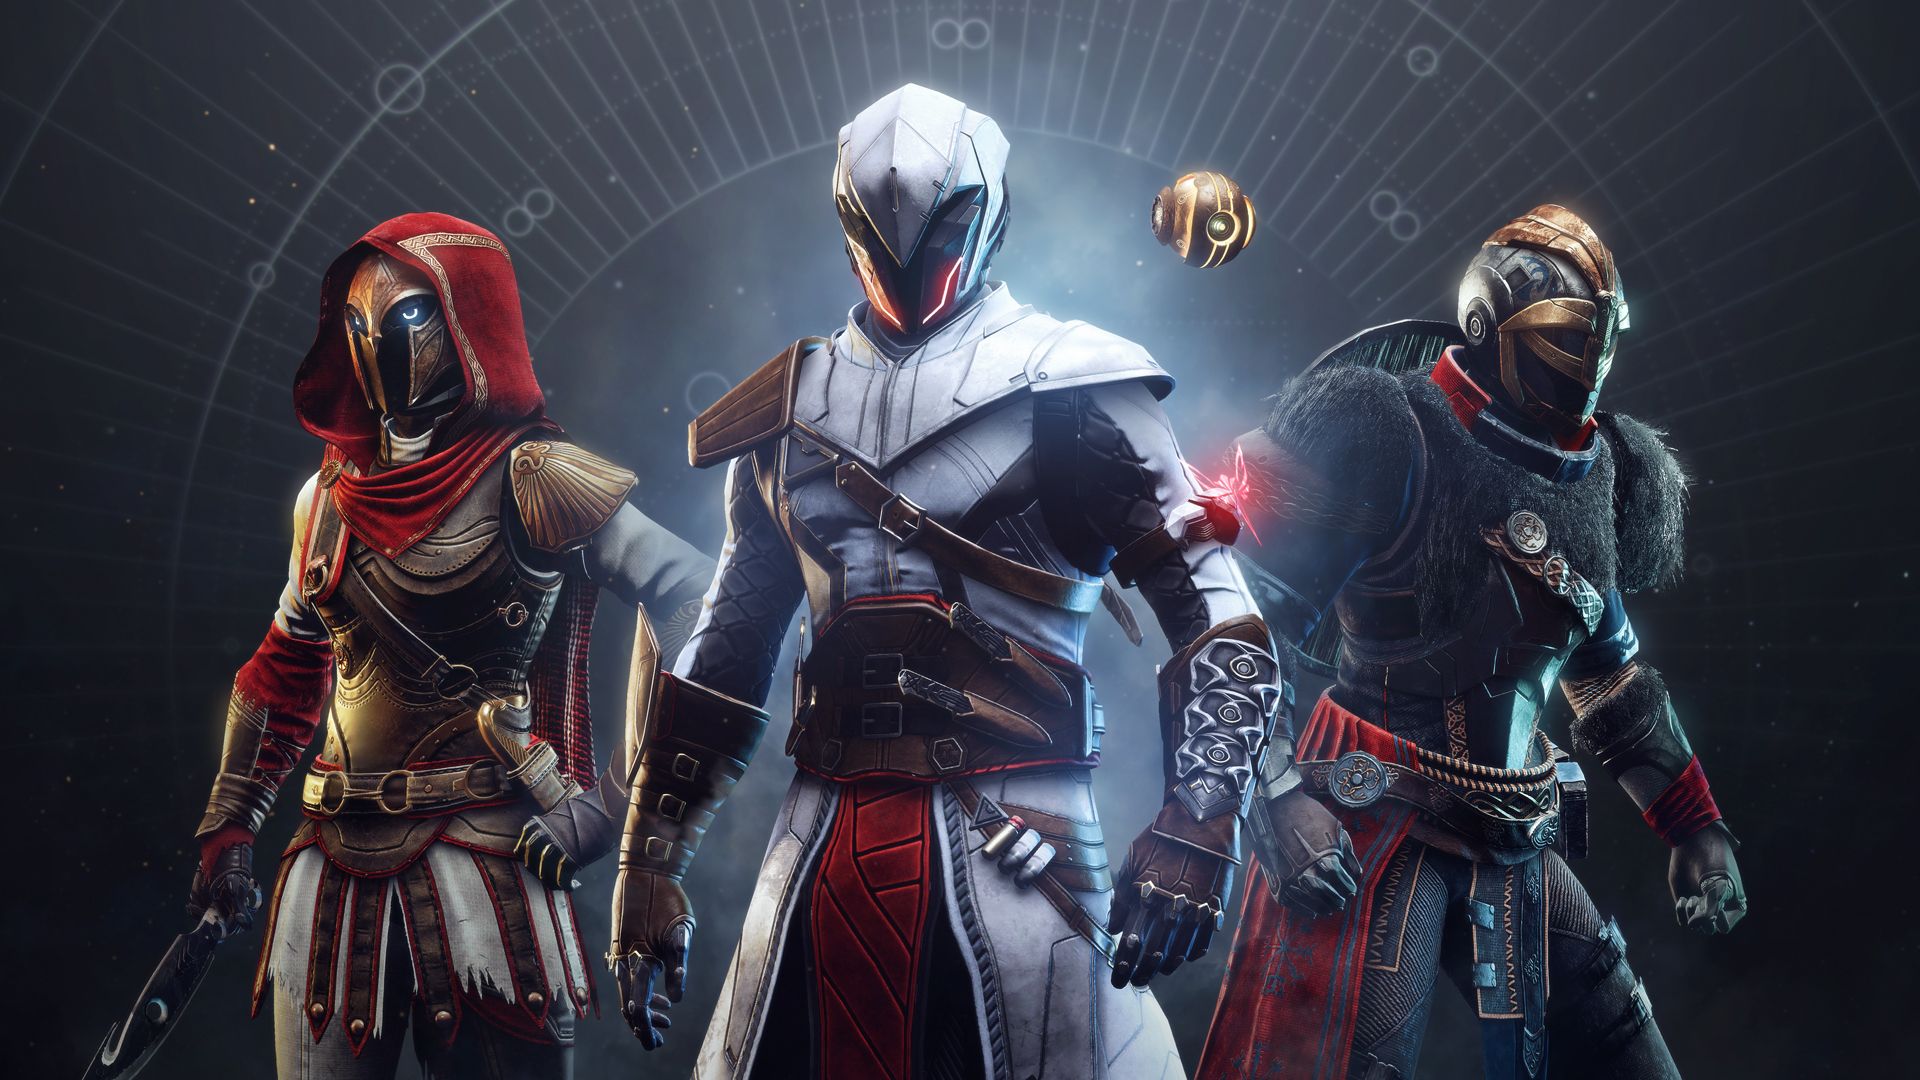 Assassin's Creed Valhalla and Destiny 2 Crossover Cosmetics Available Now -  Xbox Wire